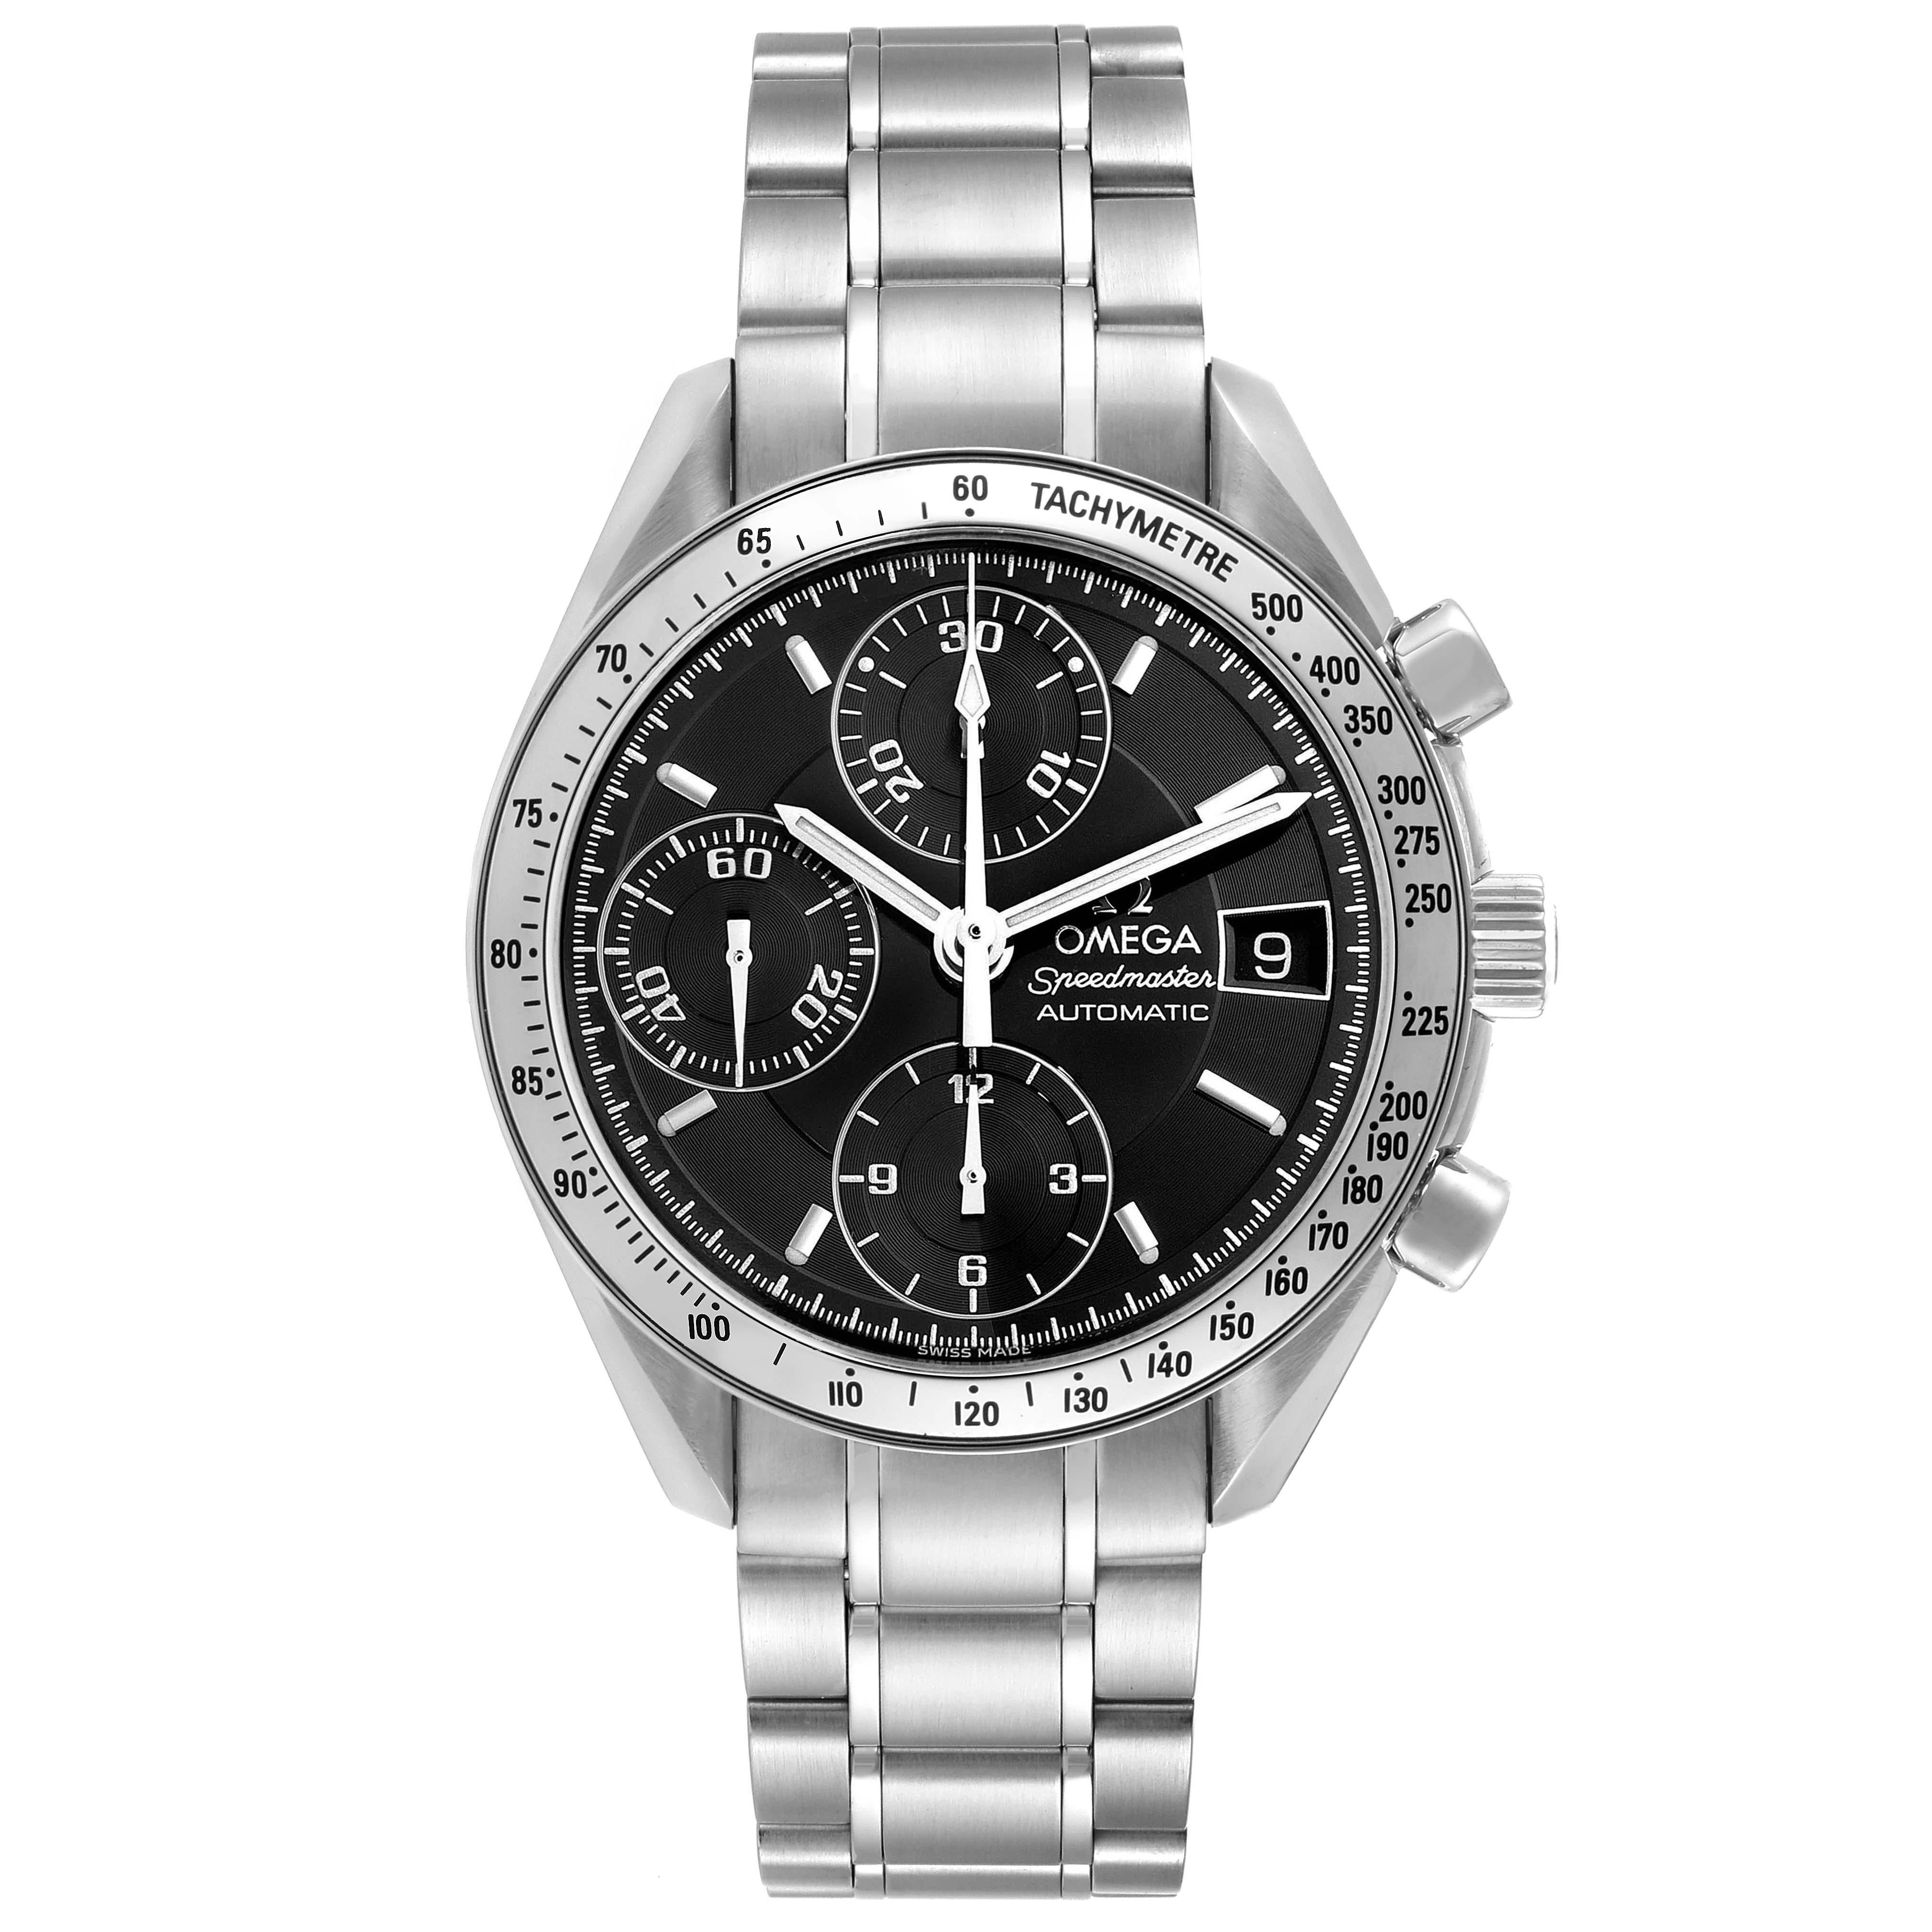 Omega Speedmaster Date 39mm Automatic Steel Mens Watch 3513.50.00 Card. Automatic self-winding chronograph movement. Stainless steel round case 39 mm in diameter. Stainless steel bezel with tachymetre function. Scratch-resistant sapphire crystal